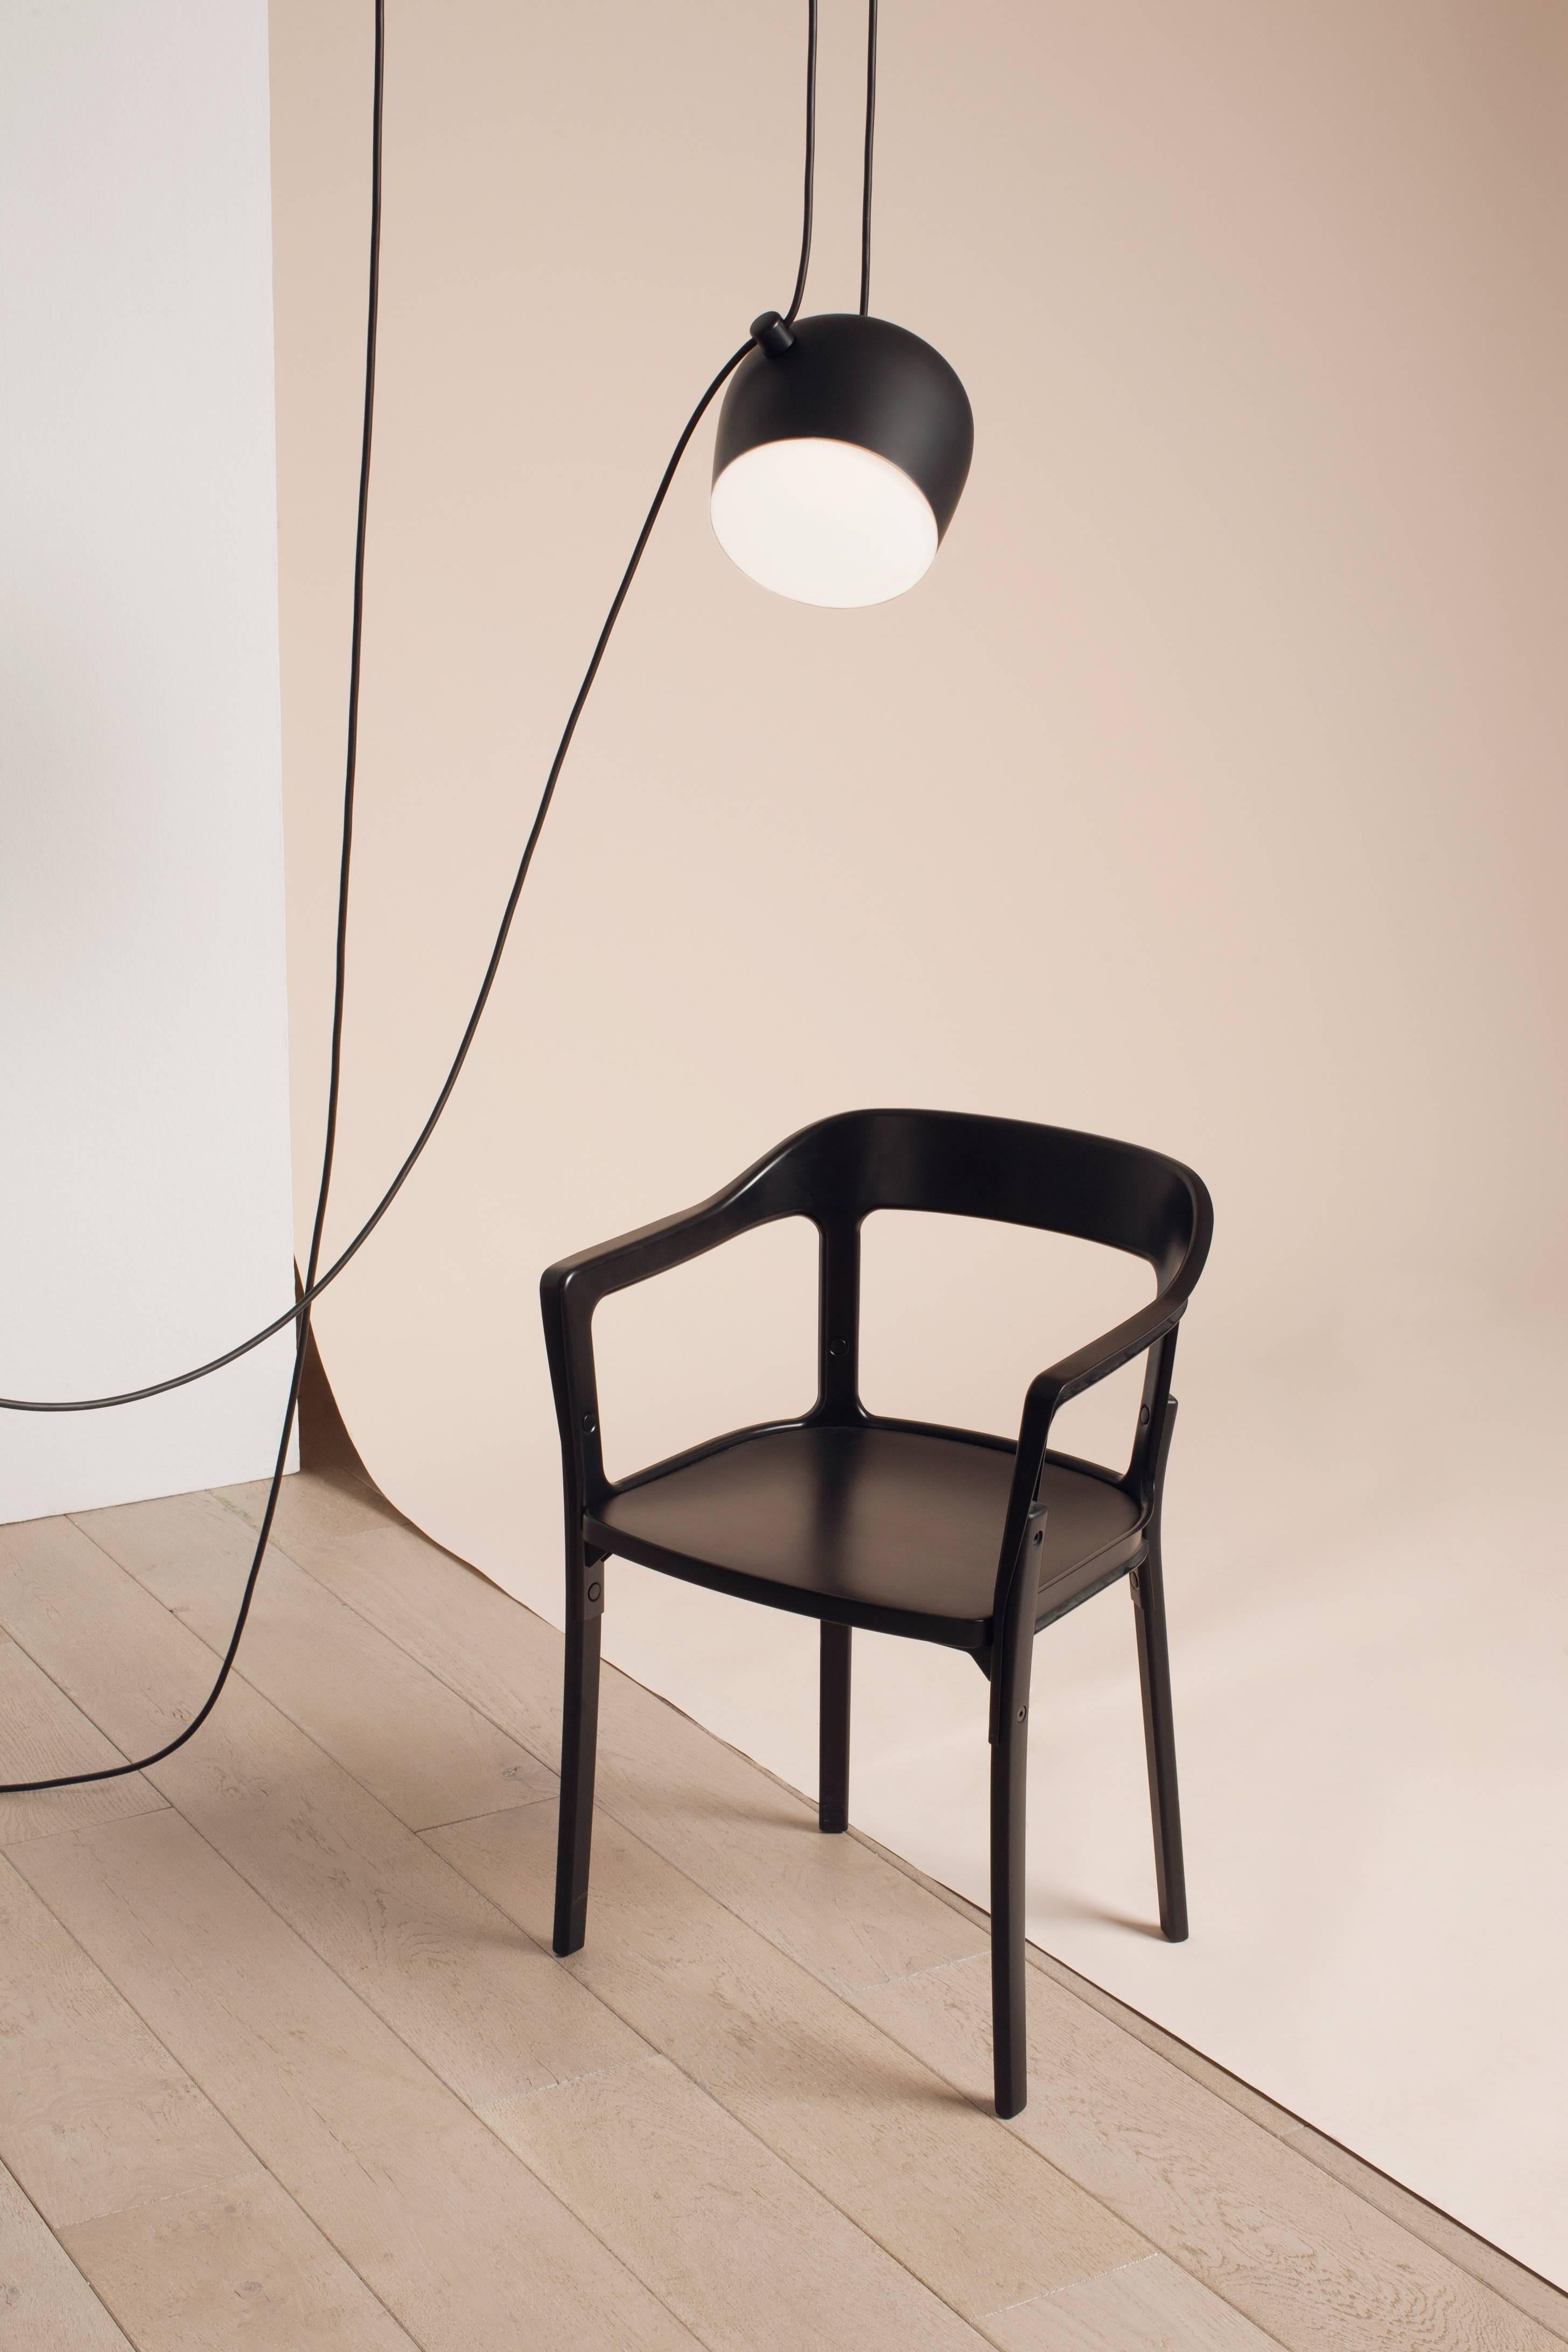 FLOS Aim Pendant Light in Black by Ronan & Erwan Bouroullec

Created by the Bouroullec brothers in 2010, the AIM ceiling light is a design stripped to its most basic—and beautiful—essence. This innovative form of modern pendant lighting is